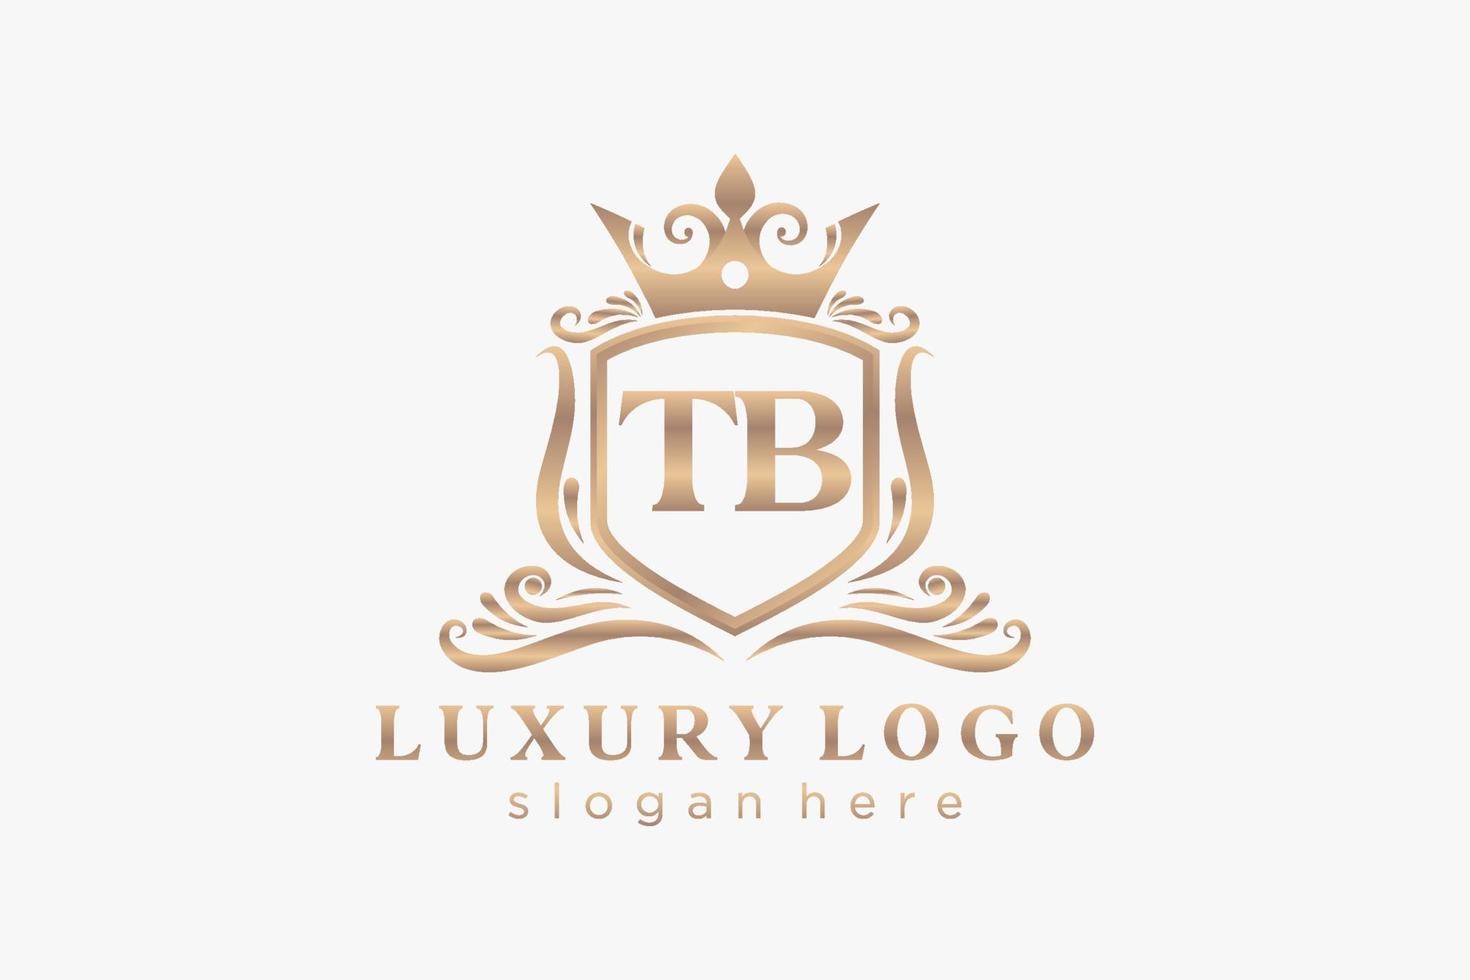 Initial TB Letter Royal Luxury Logo template in vector art for Restaurant, Royalty, Boutique, Cafe, Hotel, Heraldic, Jewelry, Fashion and other vector illustration.